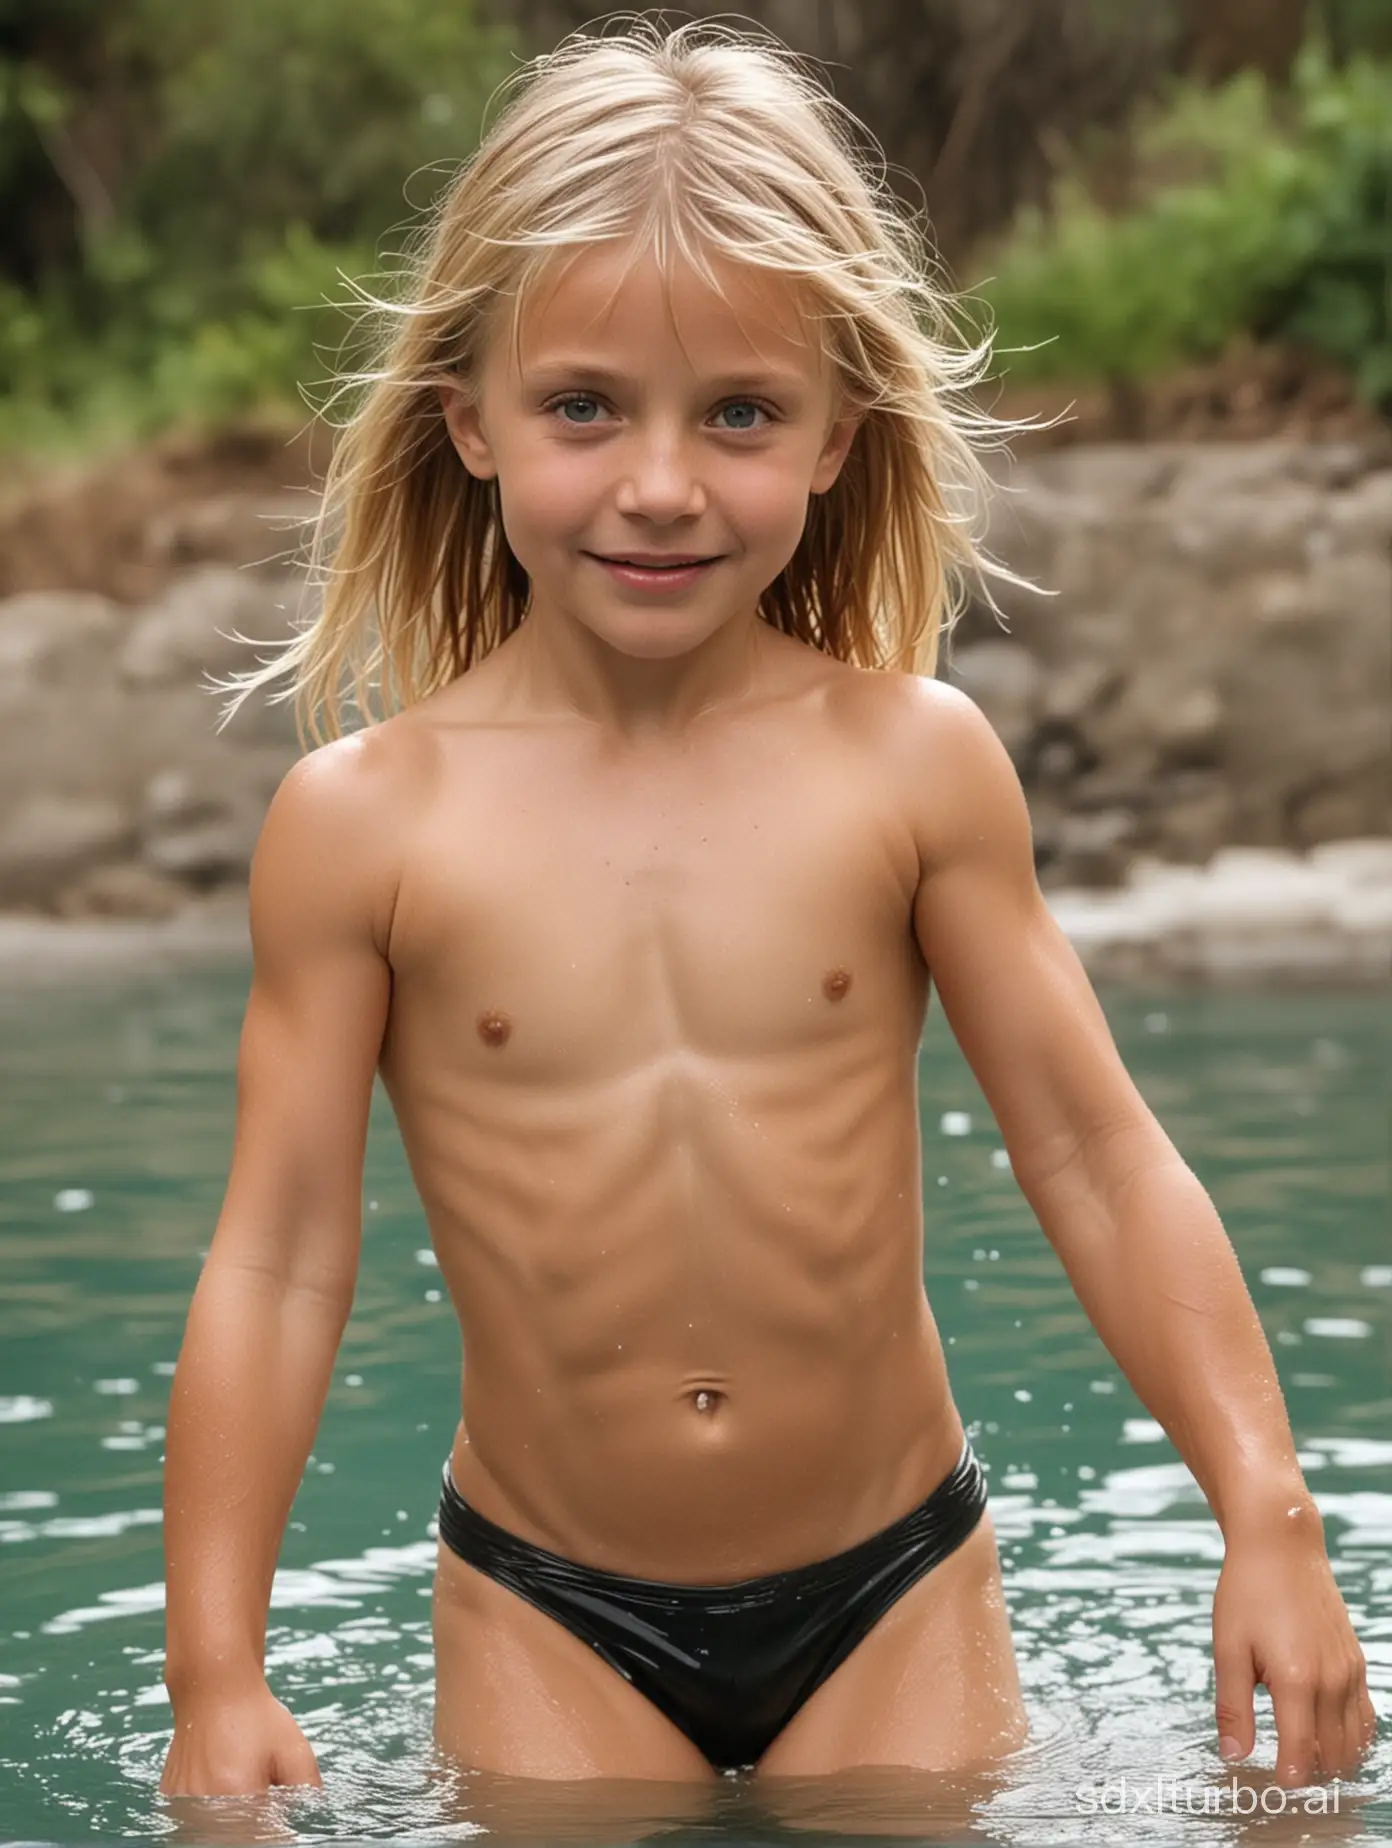 Cameron Diaz at 8 years old, very muscular abs, bathing